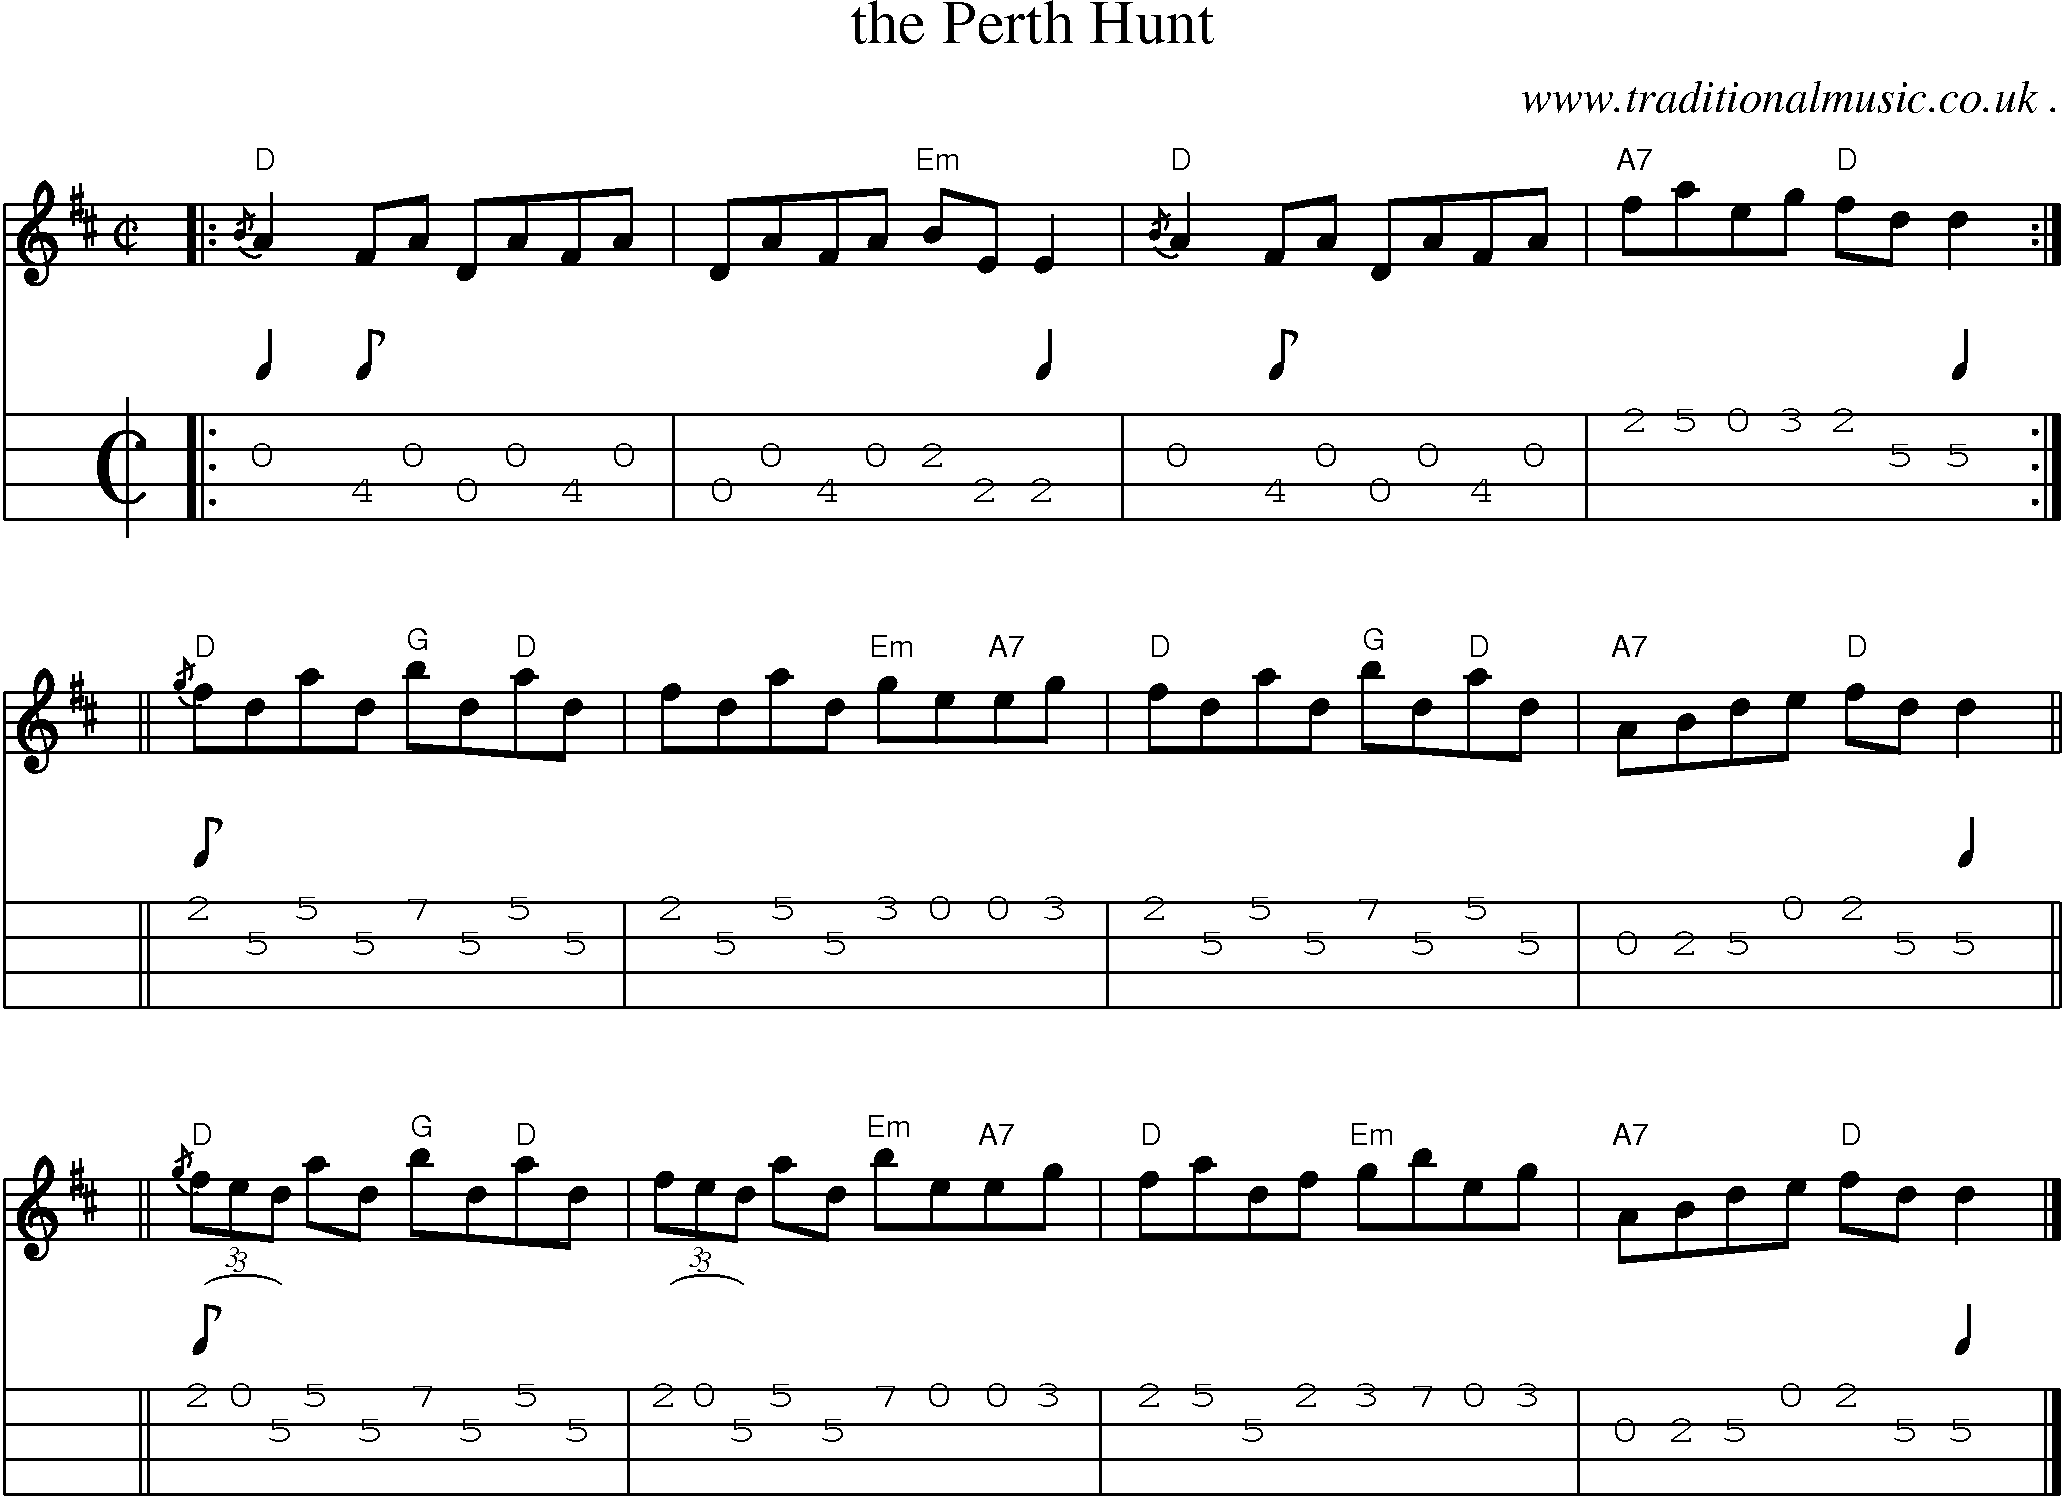 Sheet-music  score, Chords and Mandolin Tabs for The Perth Hunt